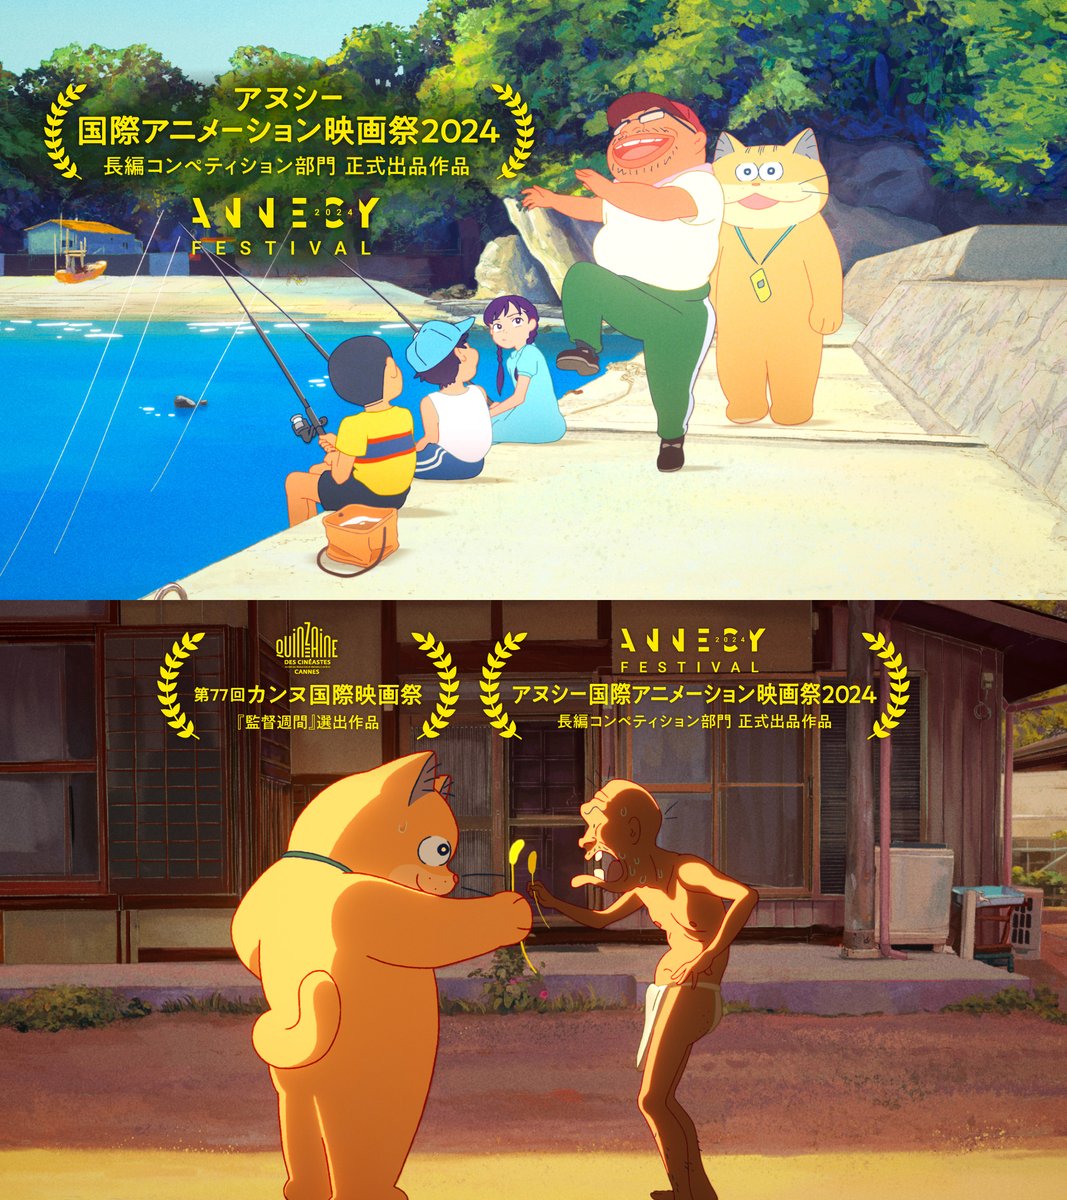 New stills of 'Ghost Cat Anzu' (Anzu, chat-fantôme) french/japanese animated movie, celebrating the film's selections at Cannes & Annecy festivals.